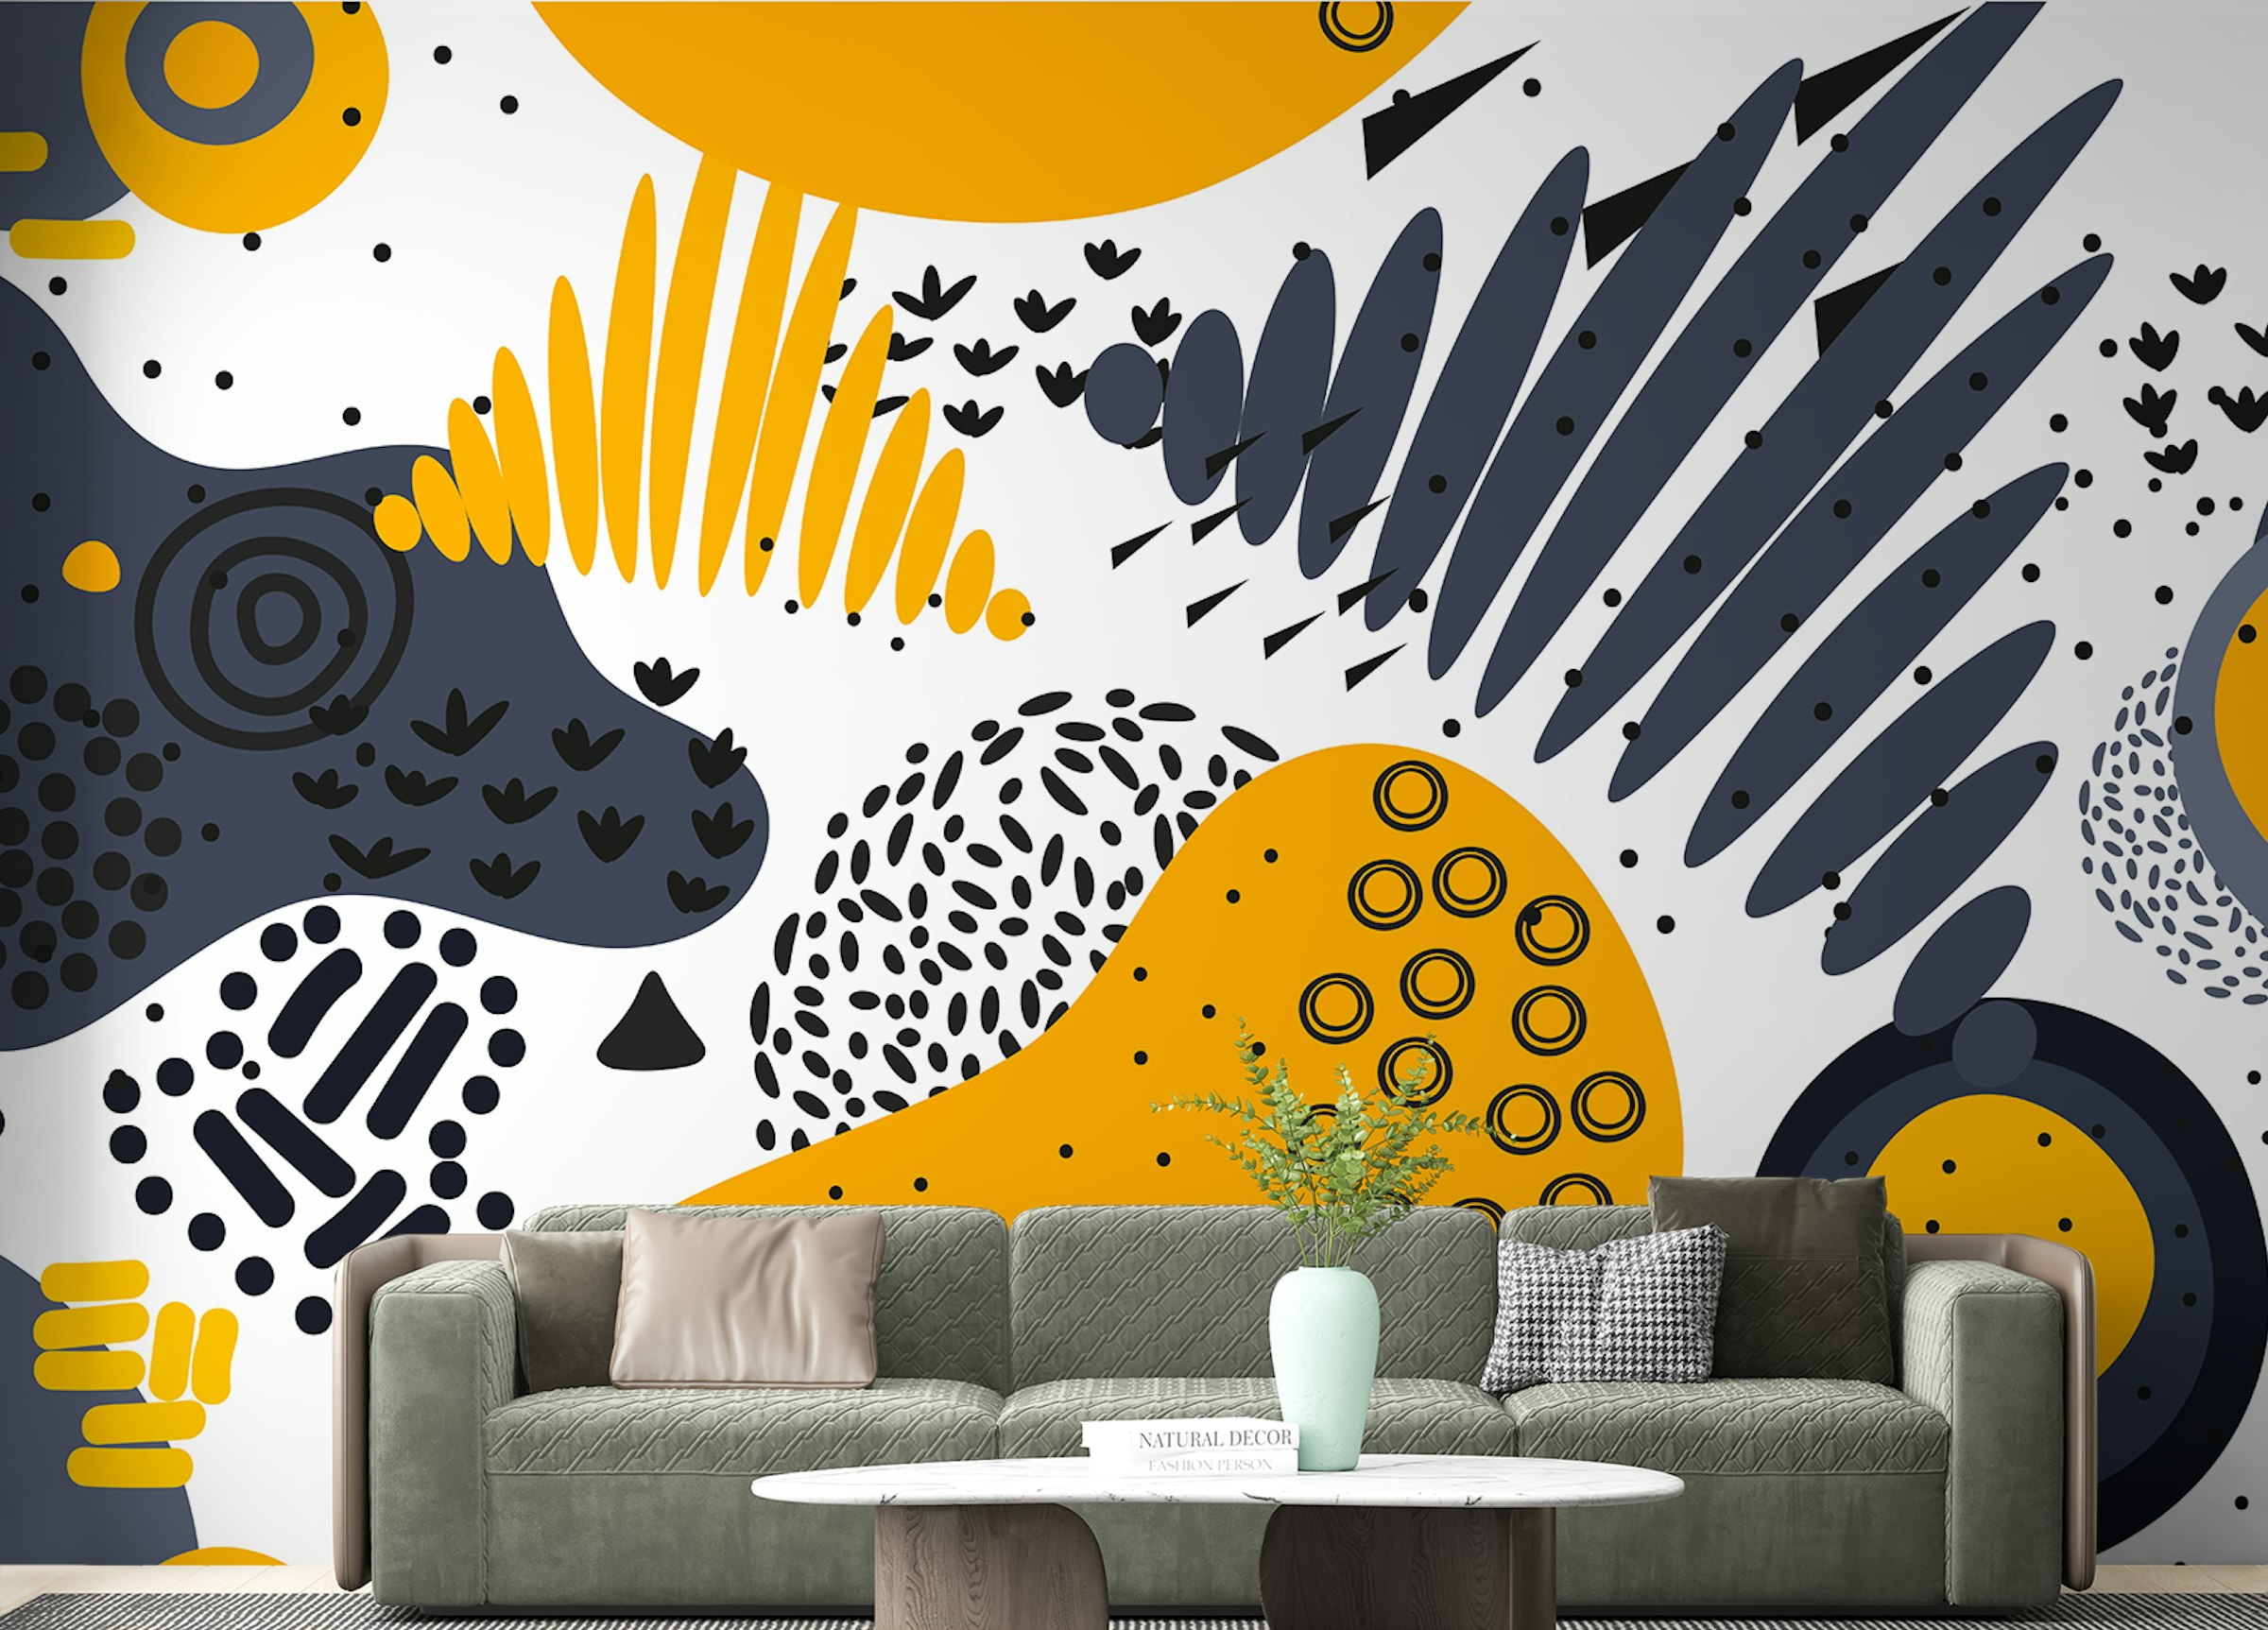 Custom made Yellow and Gray Abstract Shapes Murals